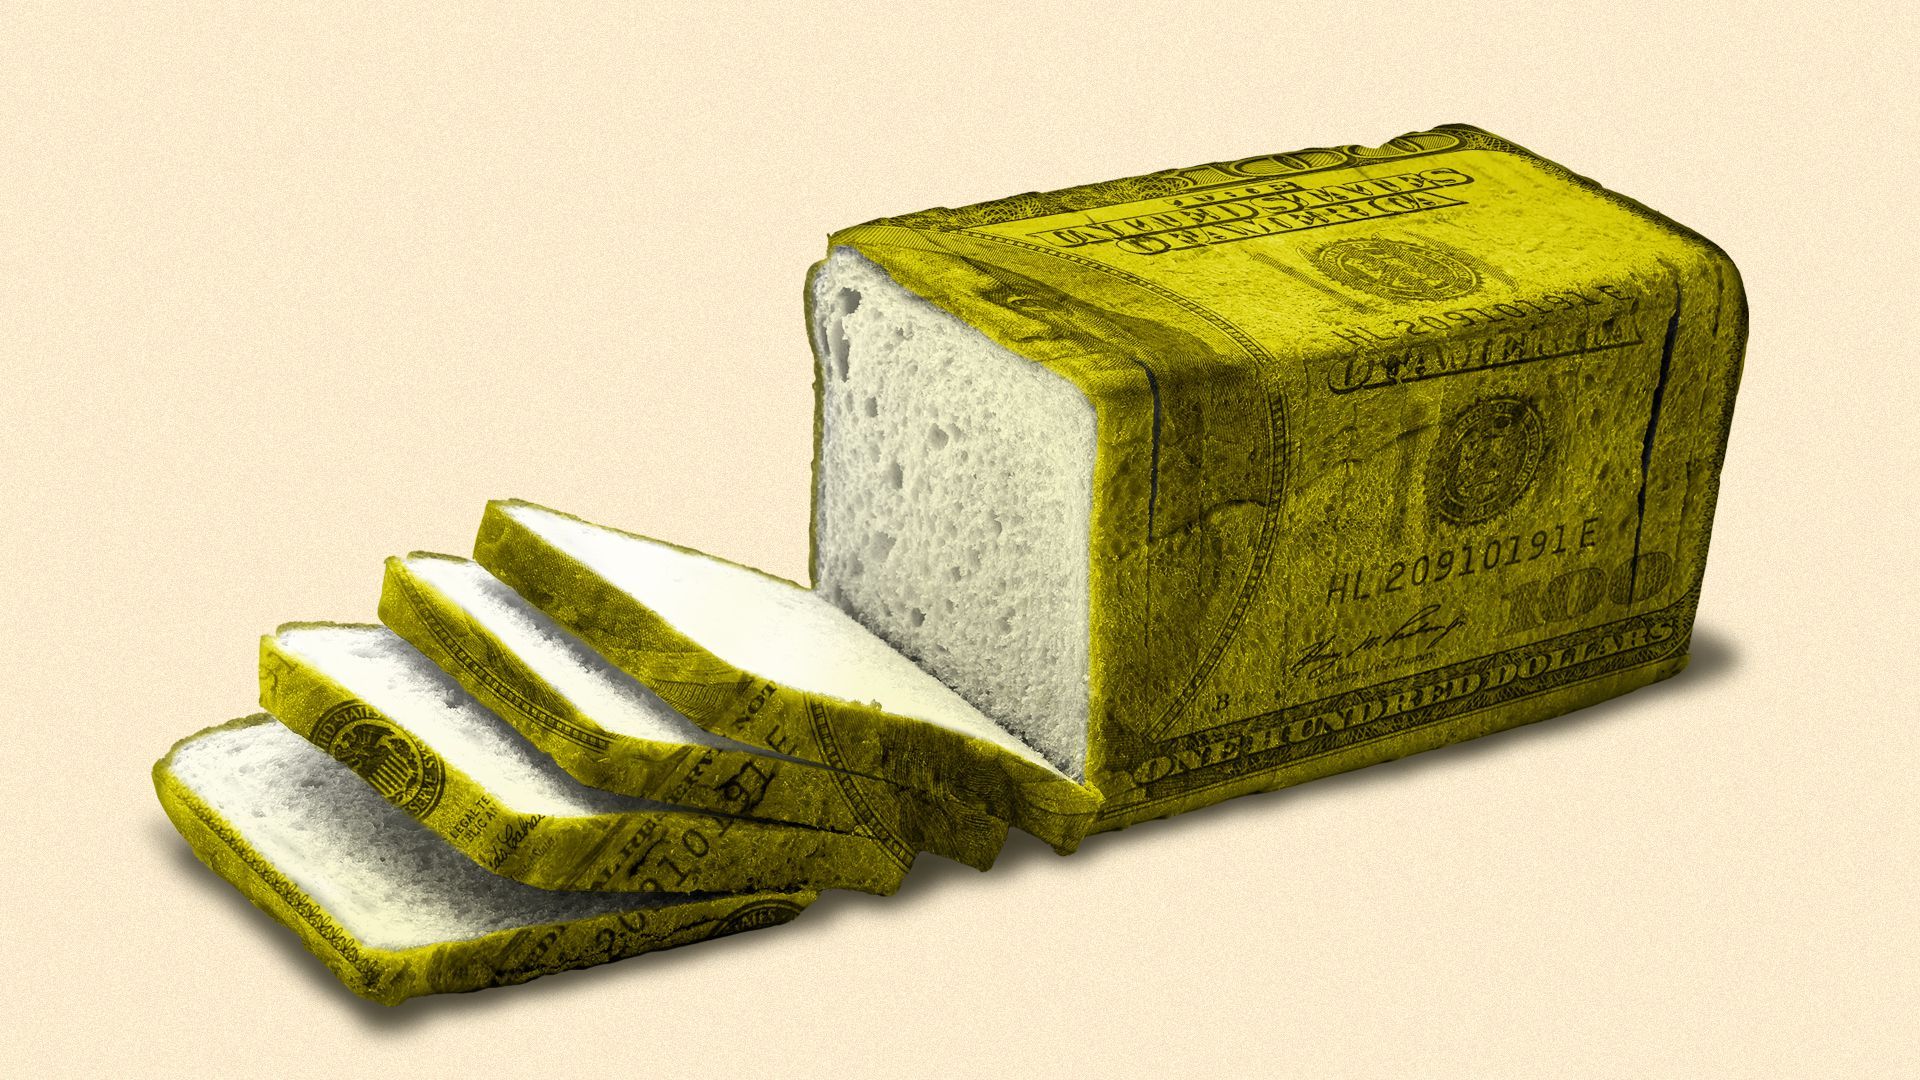 Illustration of a hundred dollar bill in the shape of a loaf of bread